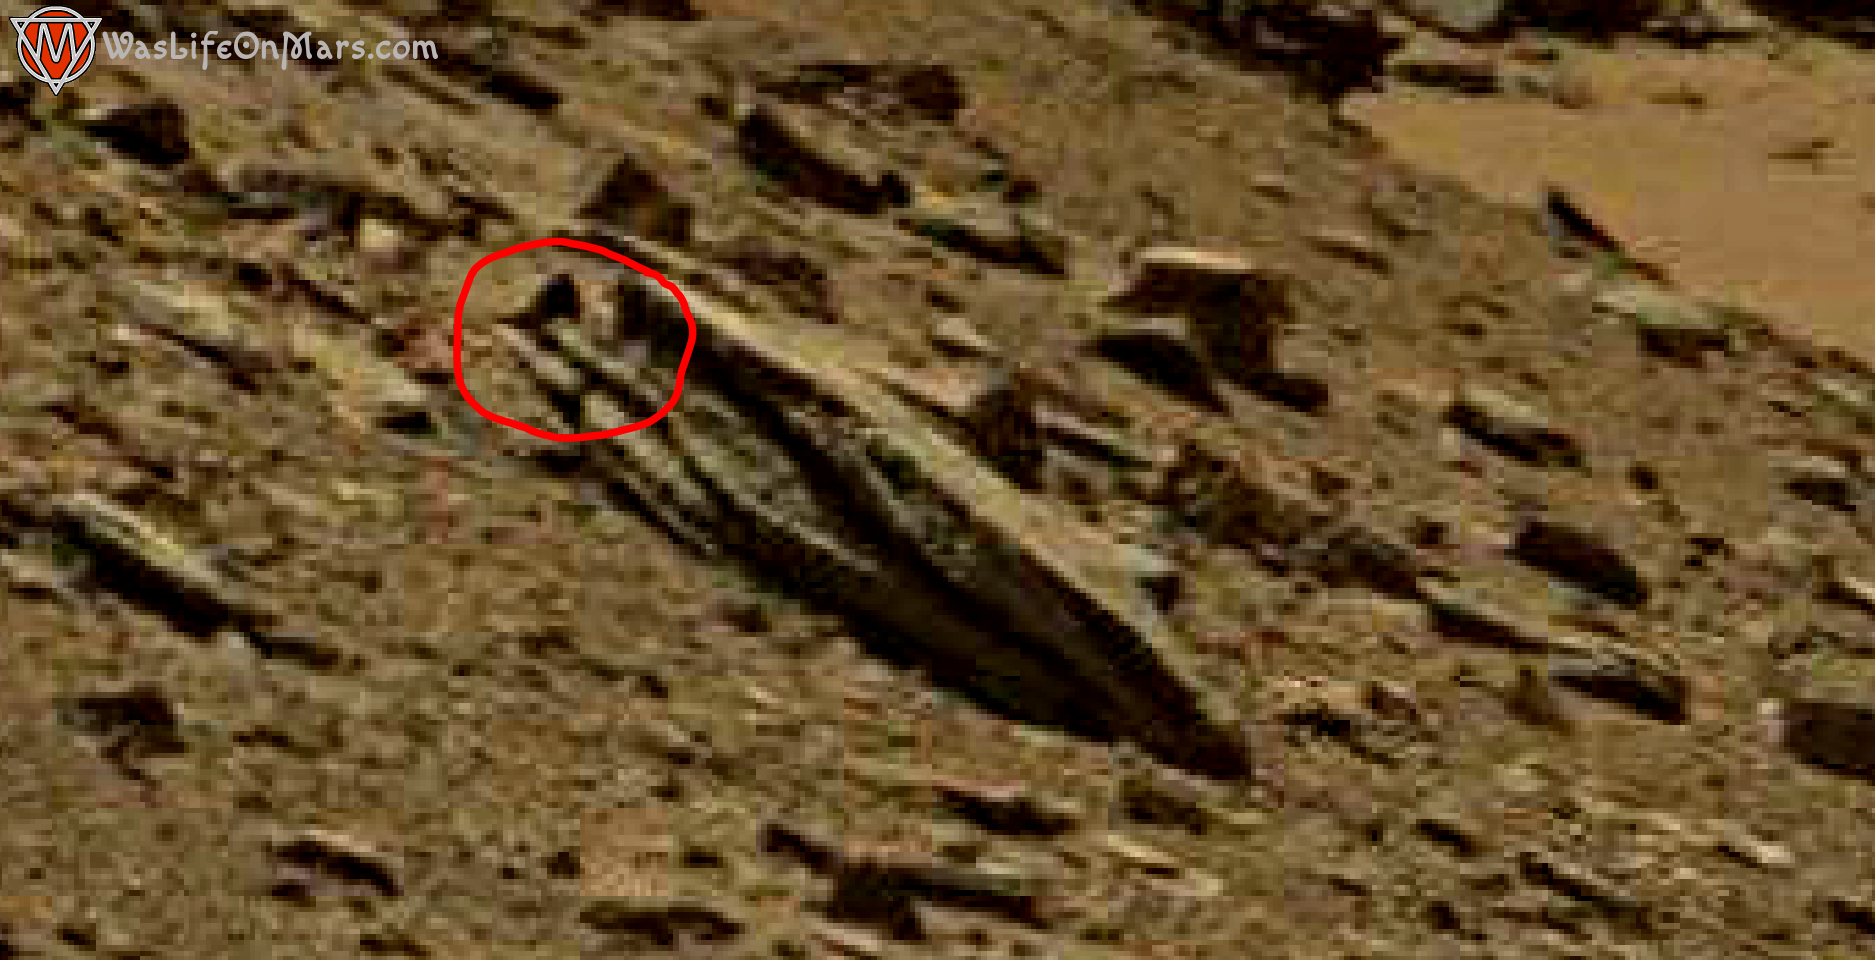 mars sol 1434 anomaly artifacts 1a2 was life on mars